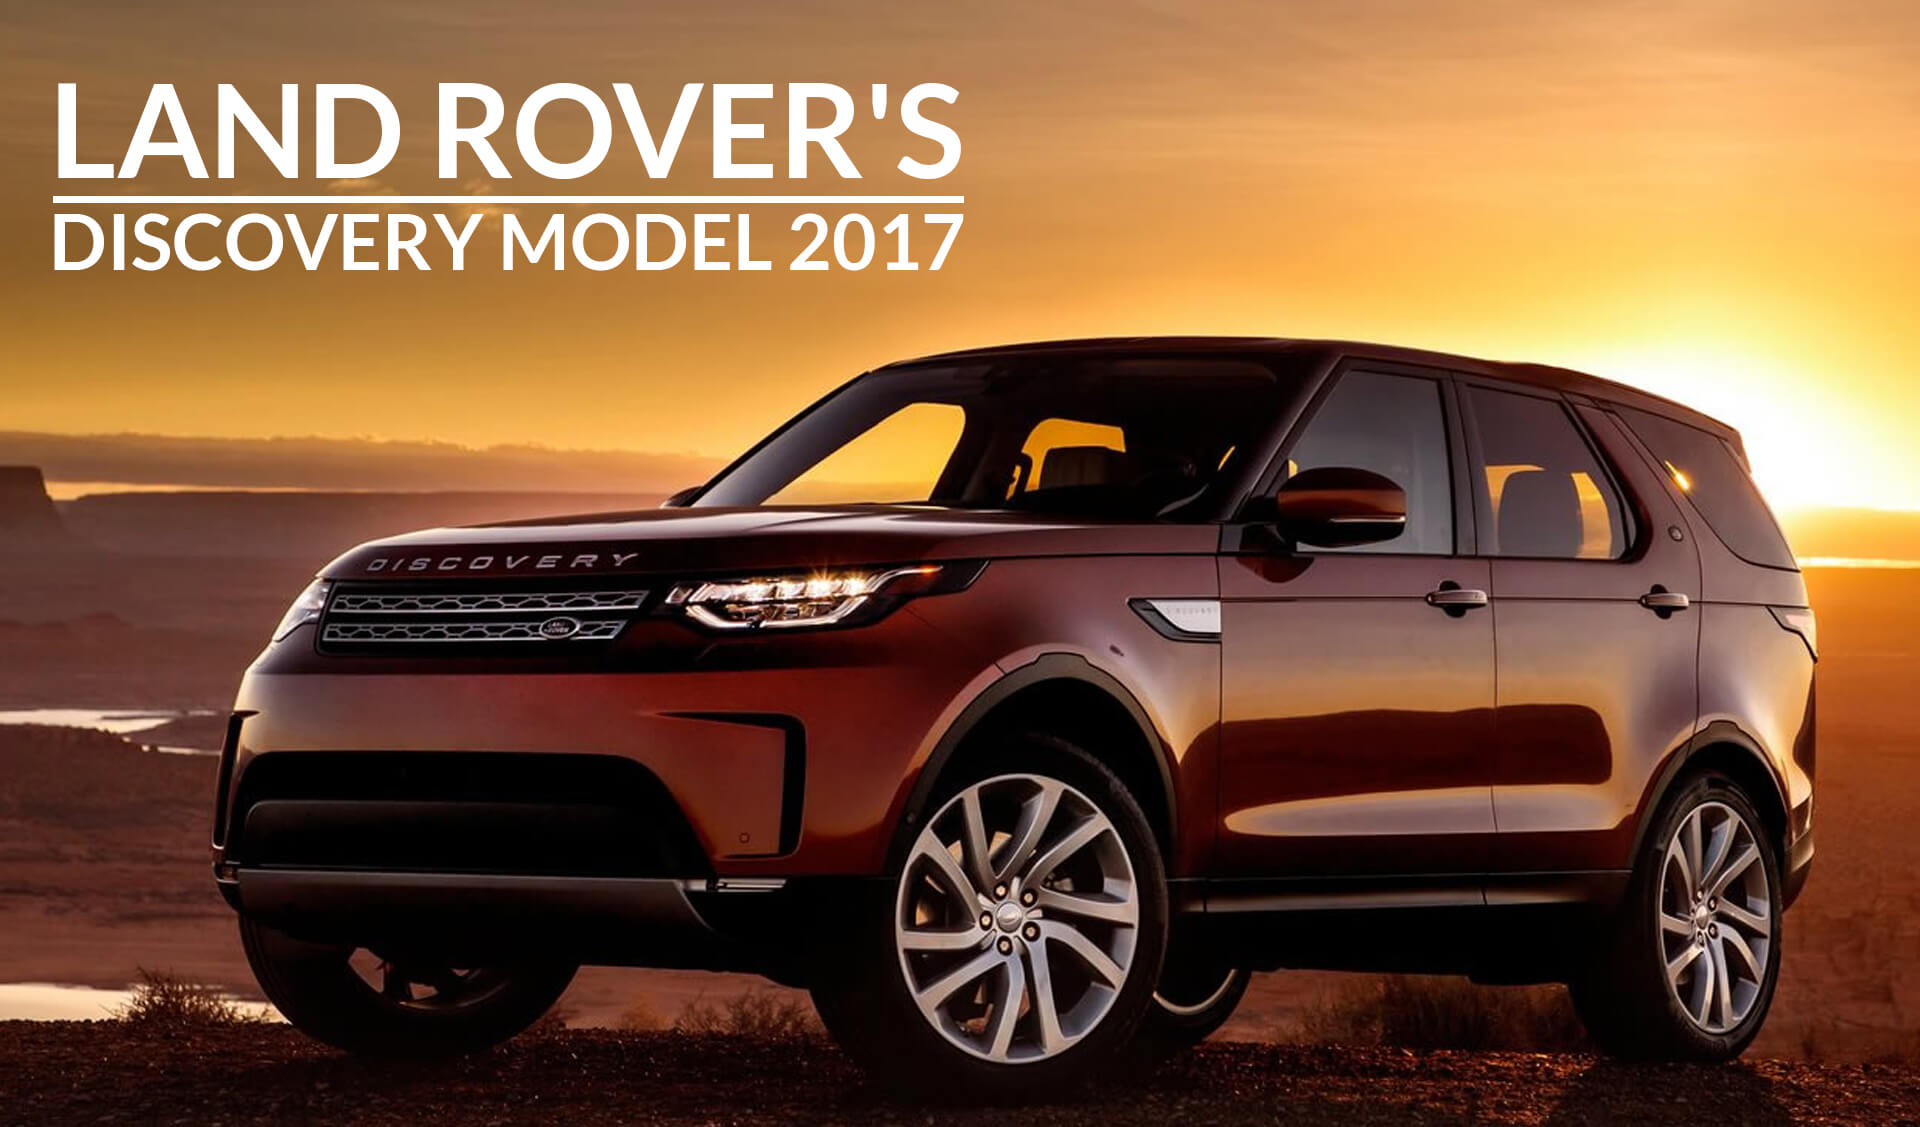 Land Rover's Discovery Model 2017